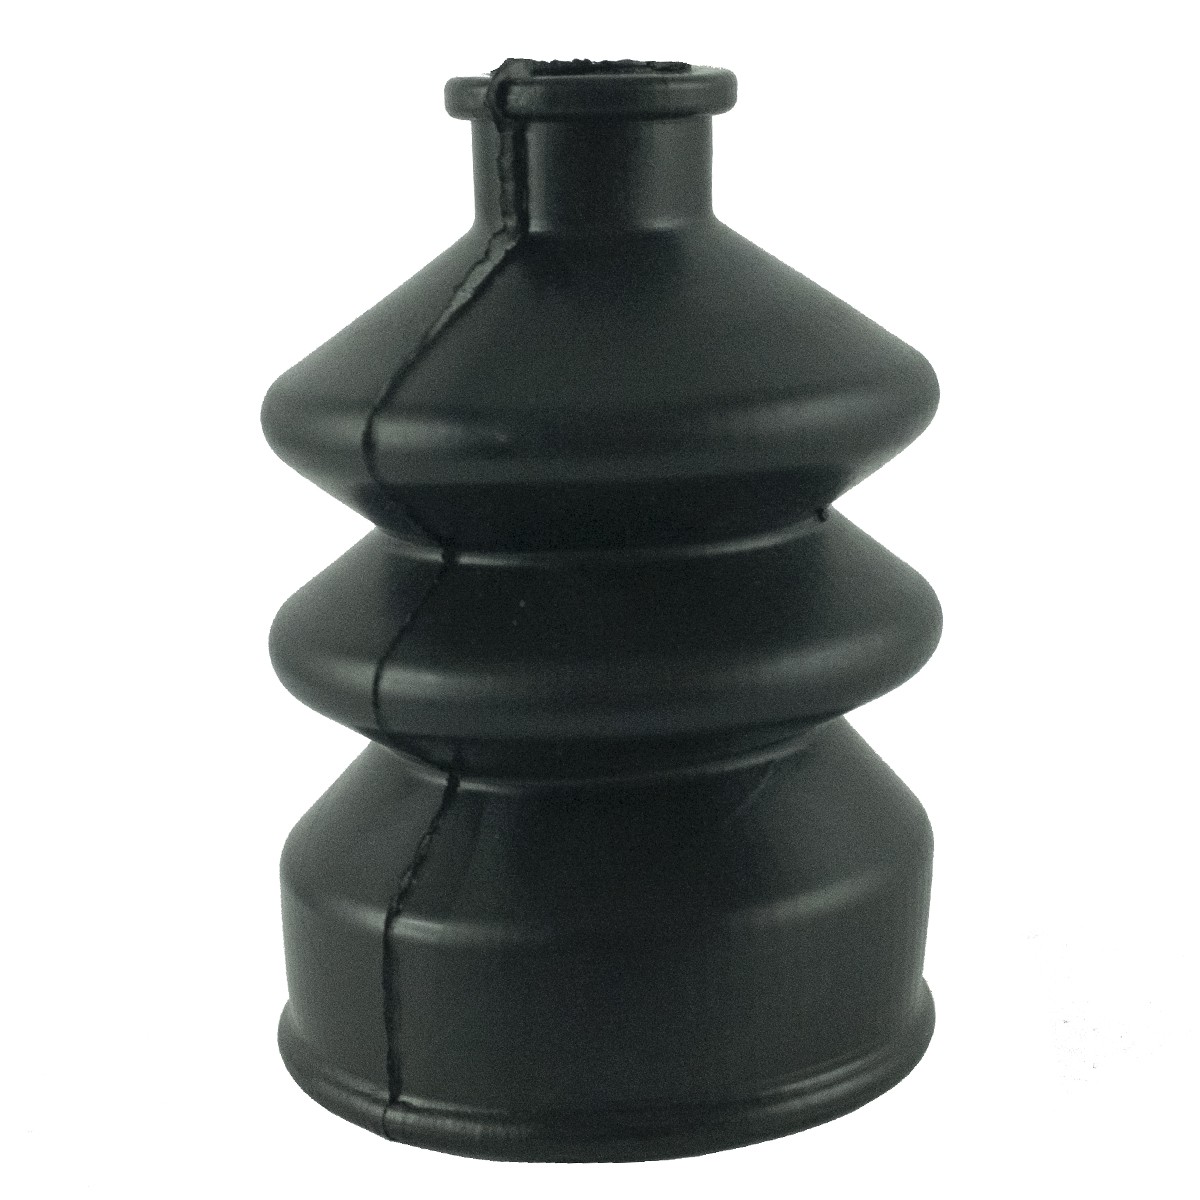 Jack rubber cover / 70 x 45 mm